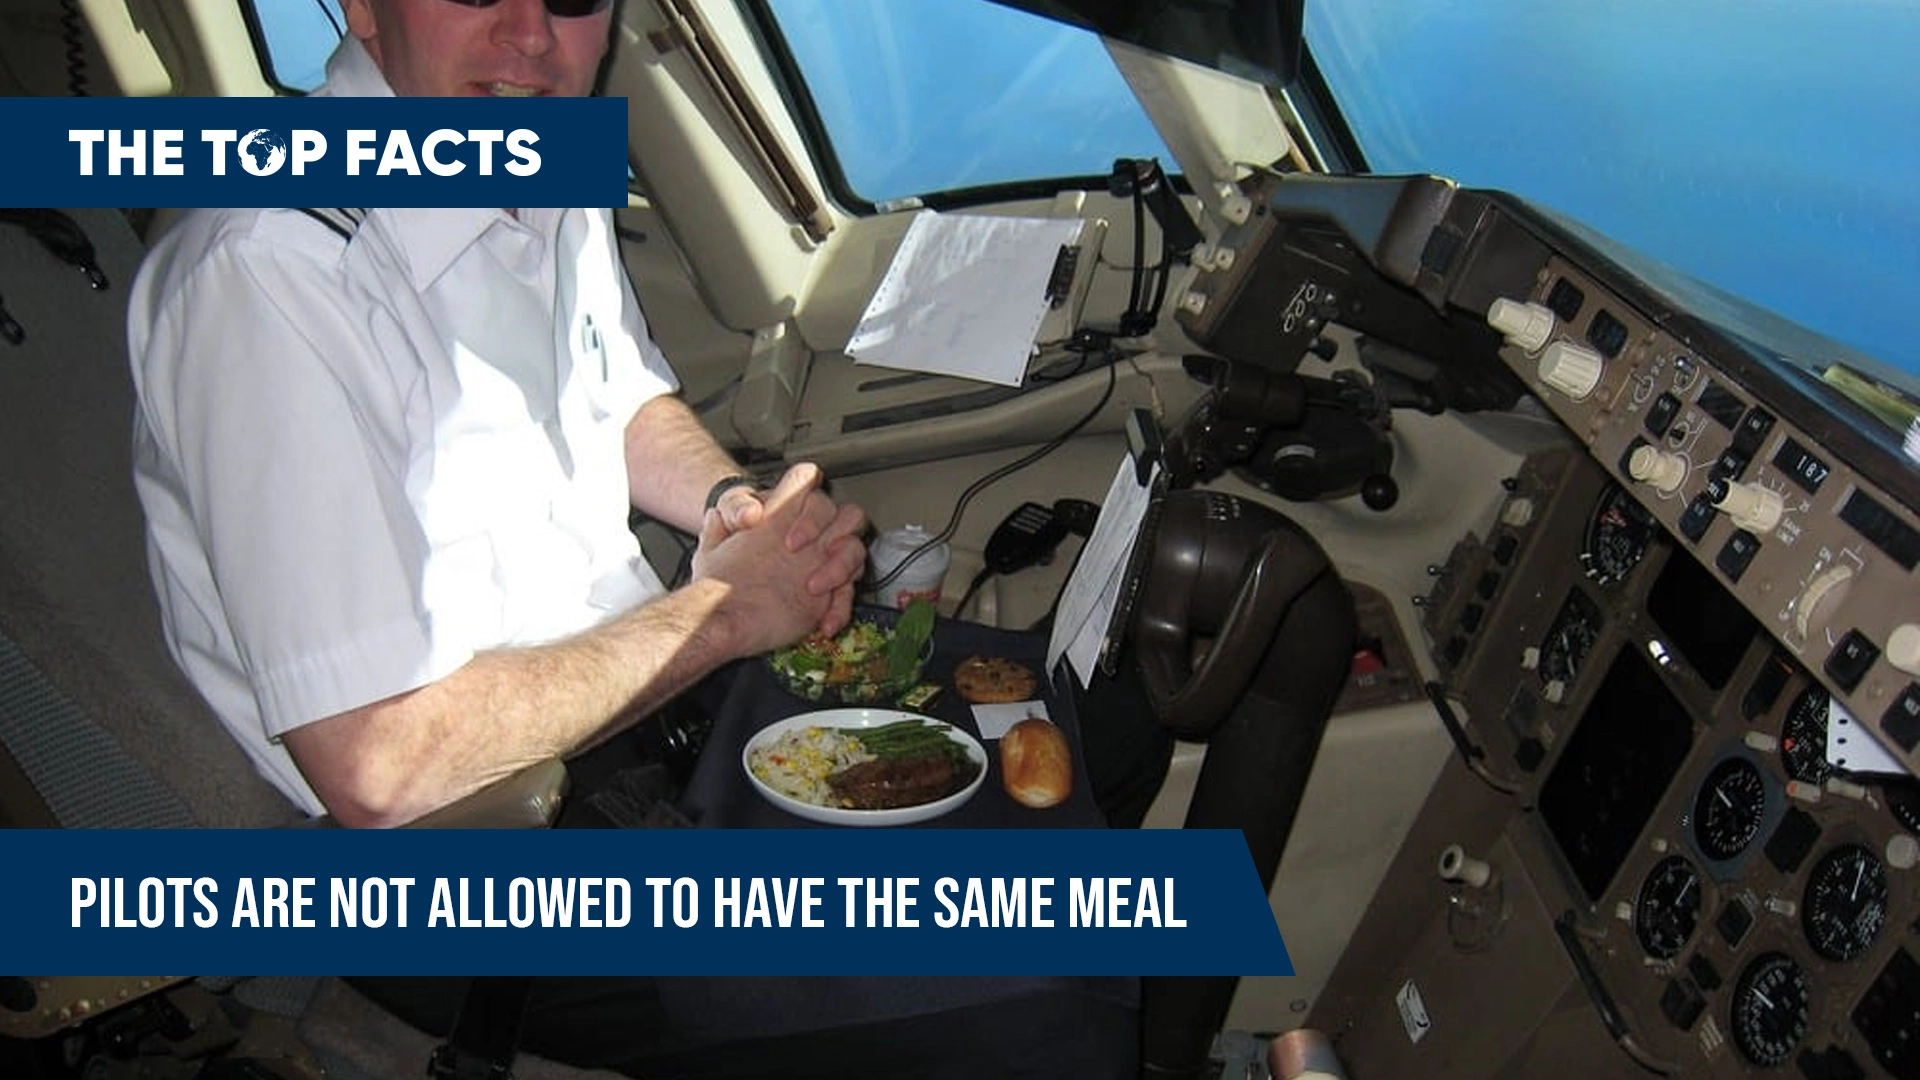 Pilots are not allowed to have the same meal